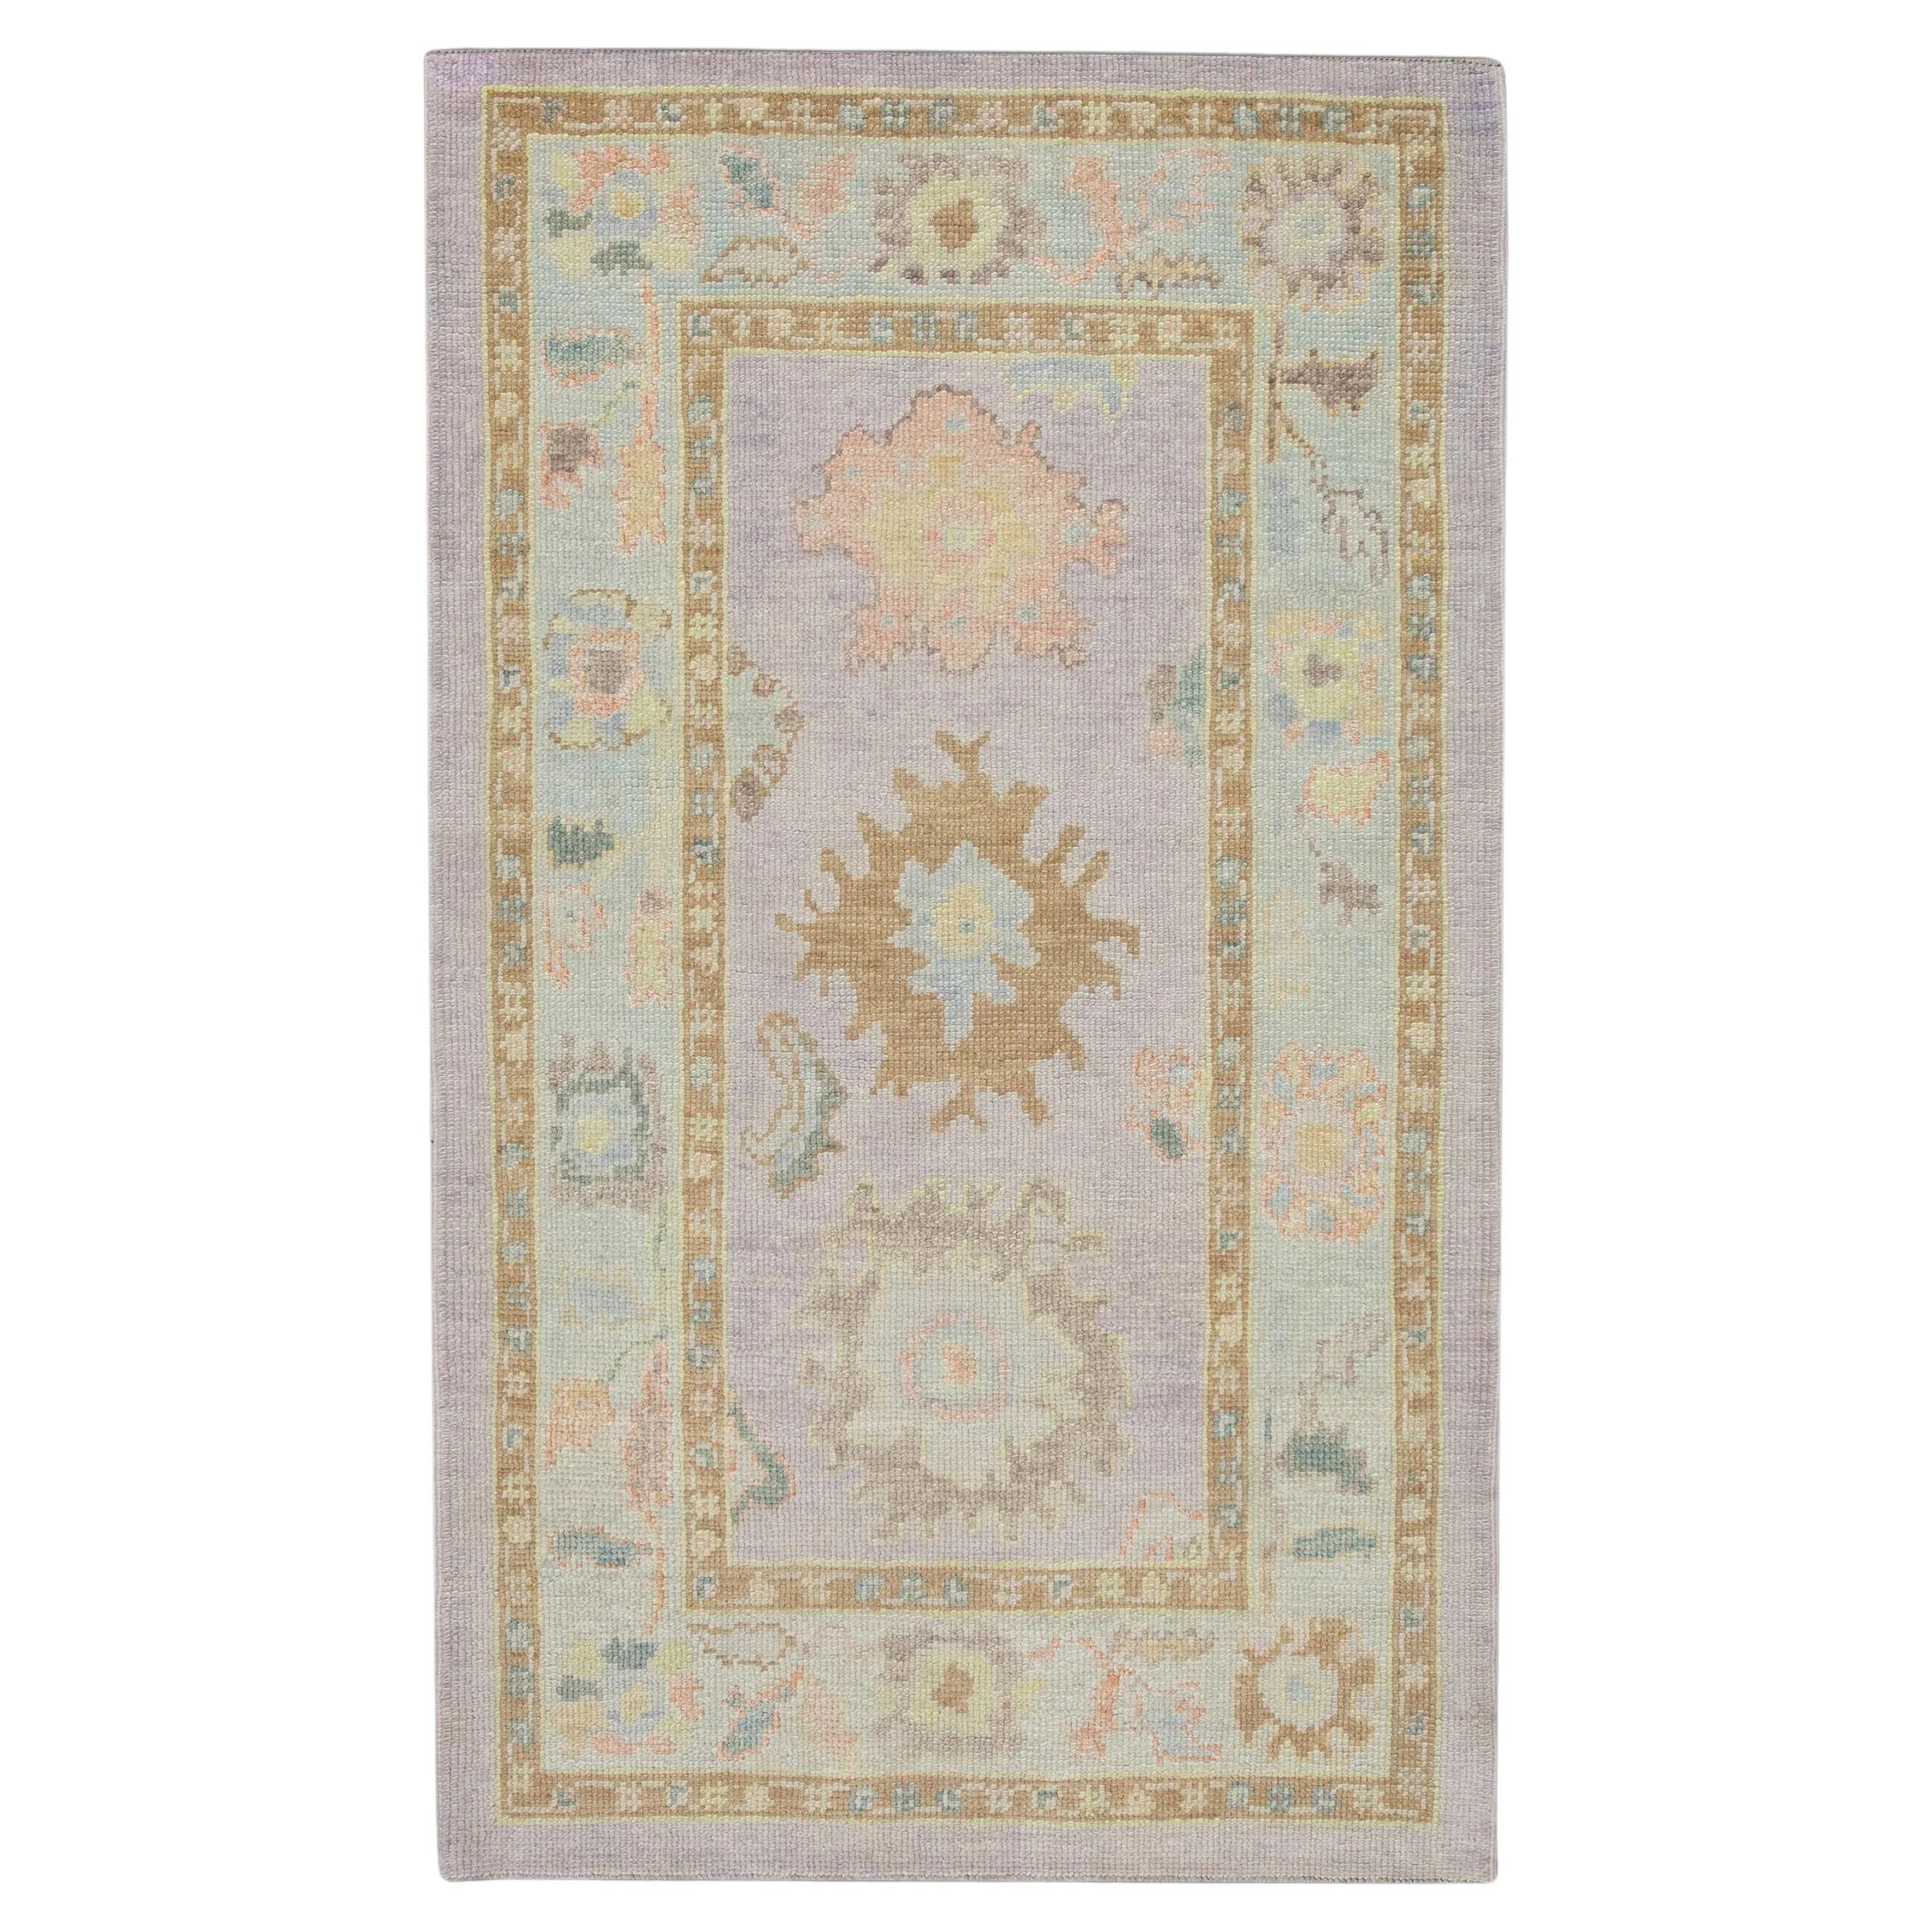 Floral Handwoven Wool Turkish Oushak Rug With Lavender Design 3'2" x 5'4" 